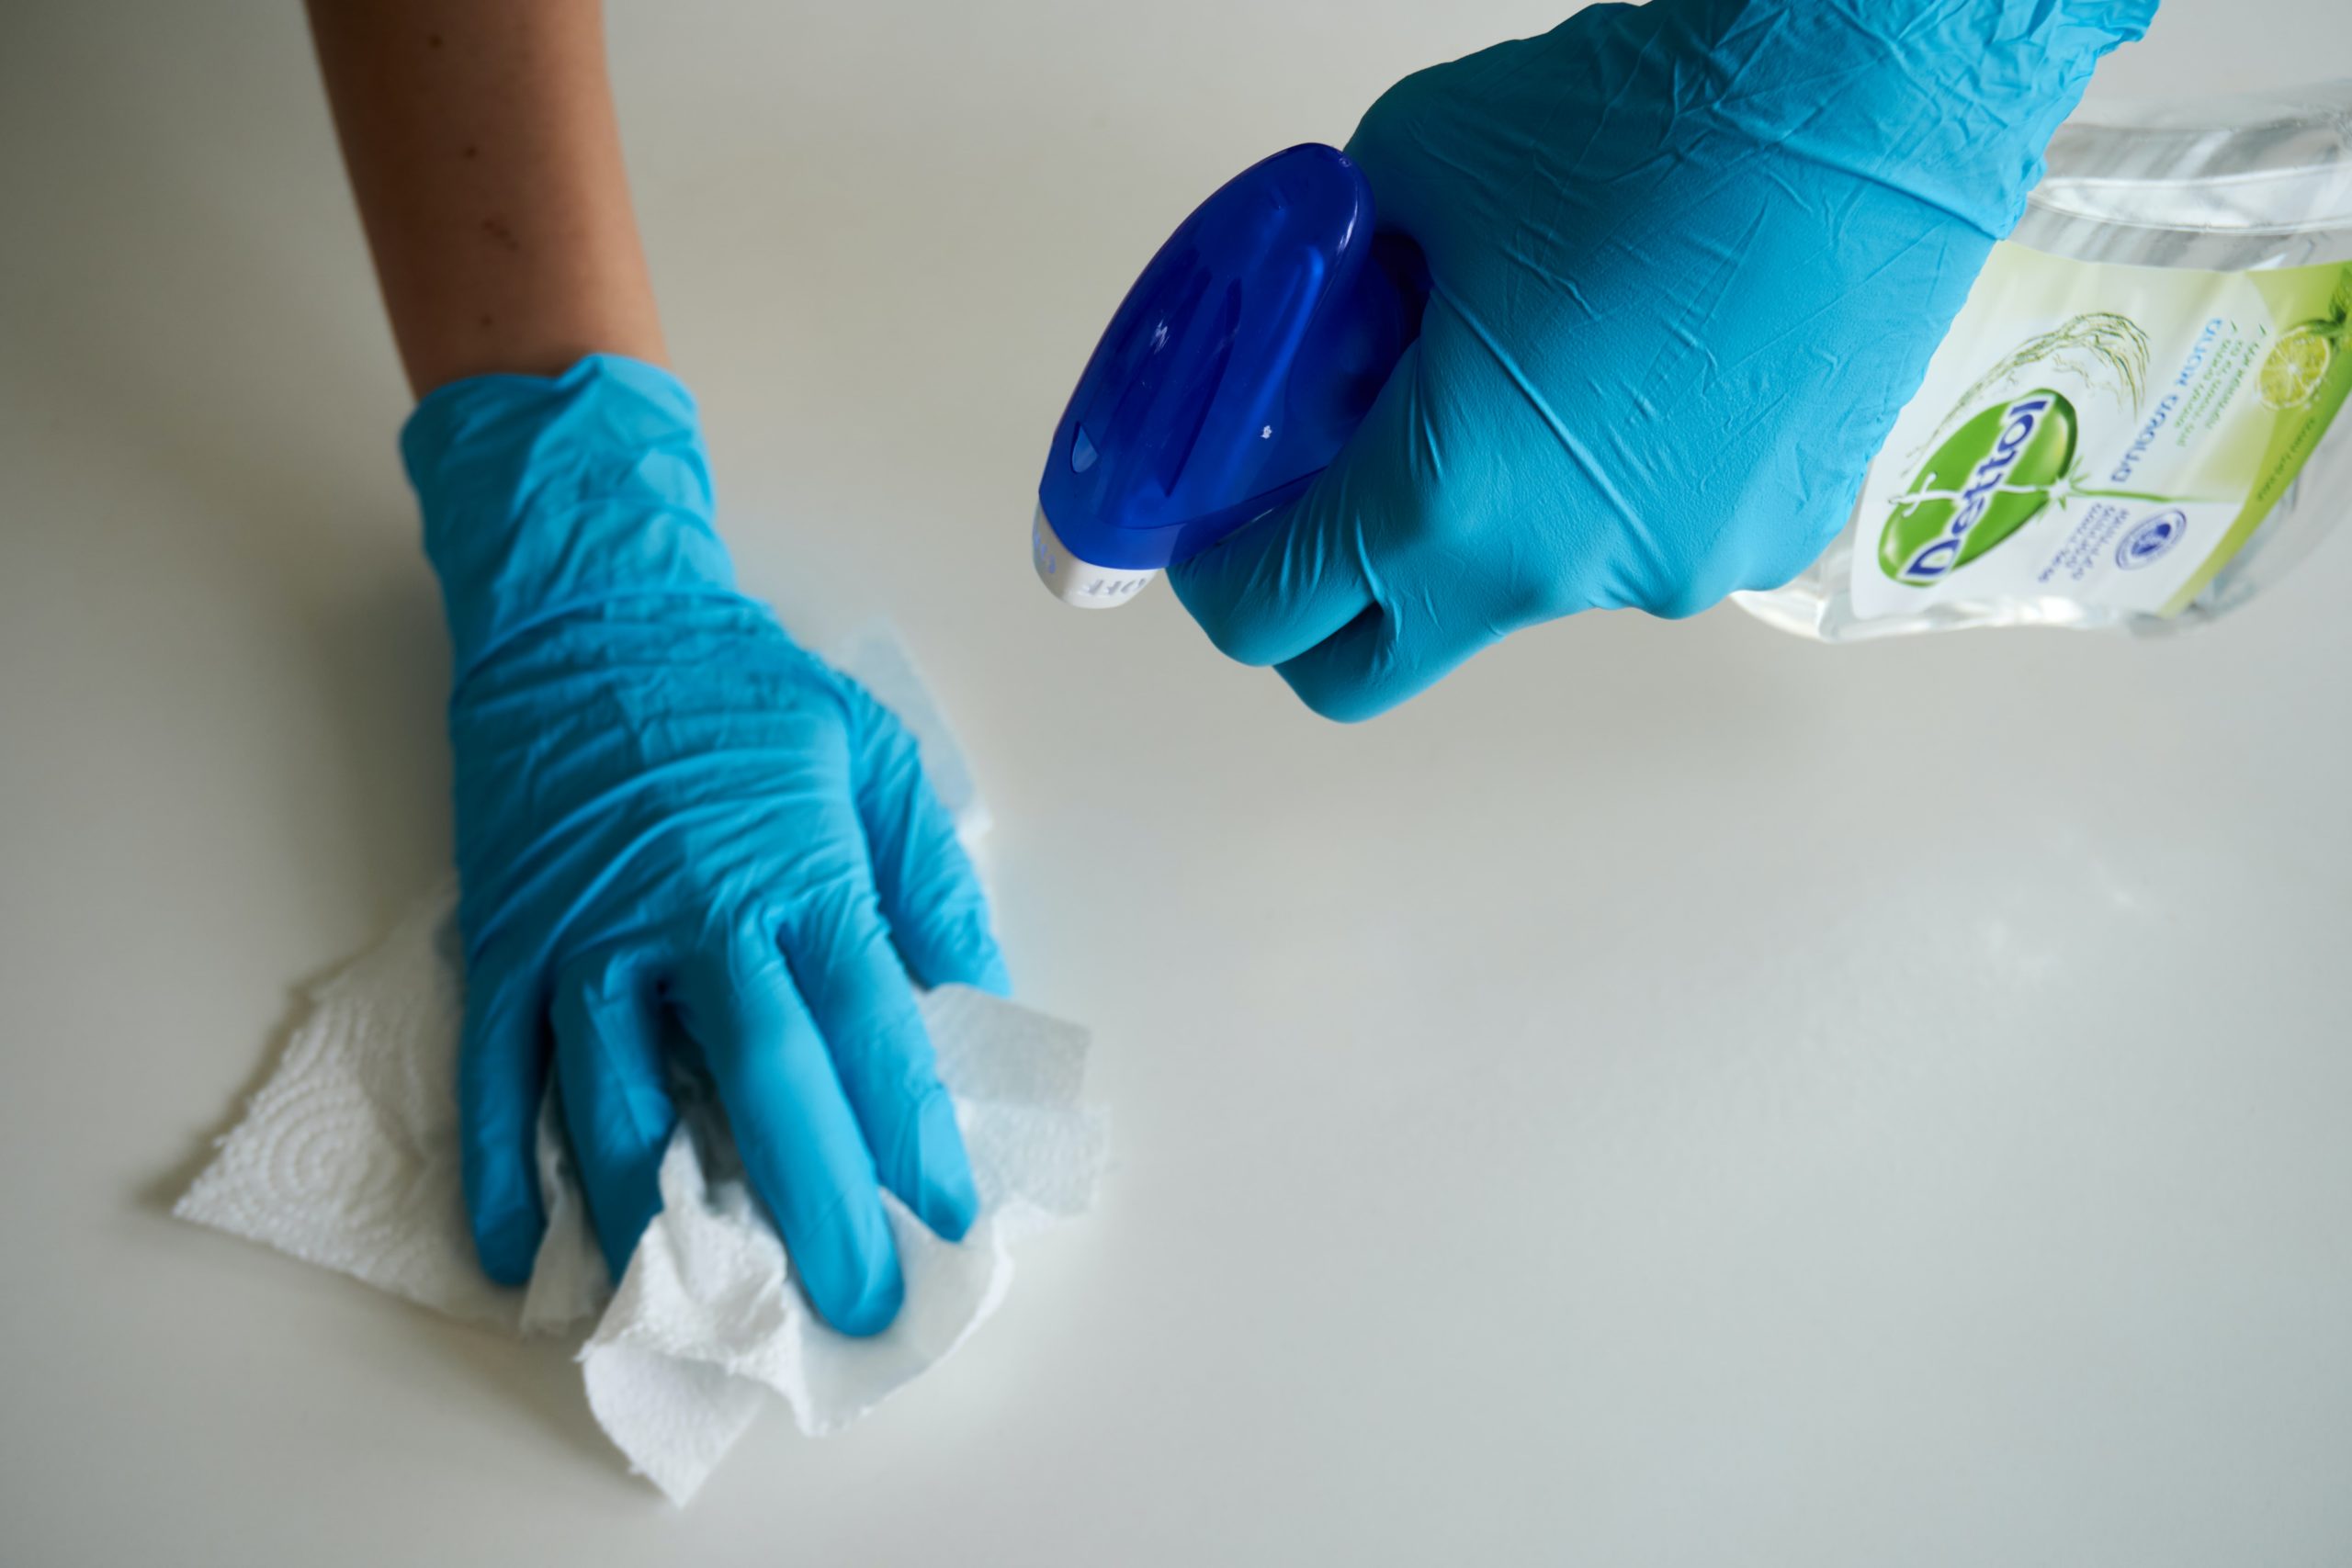 tips to disinfect - wear gloves